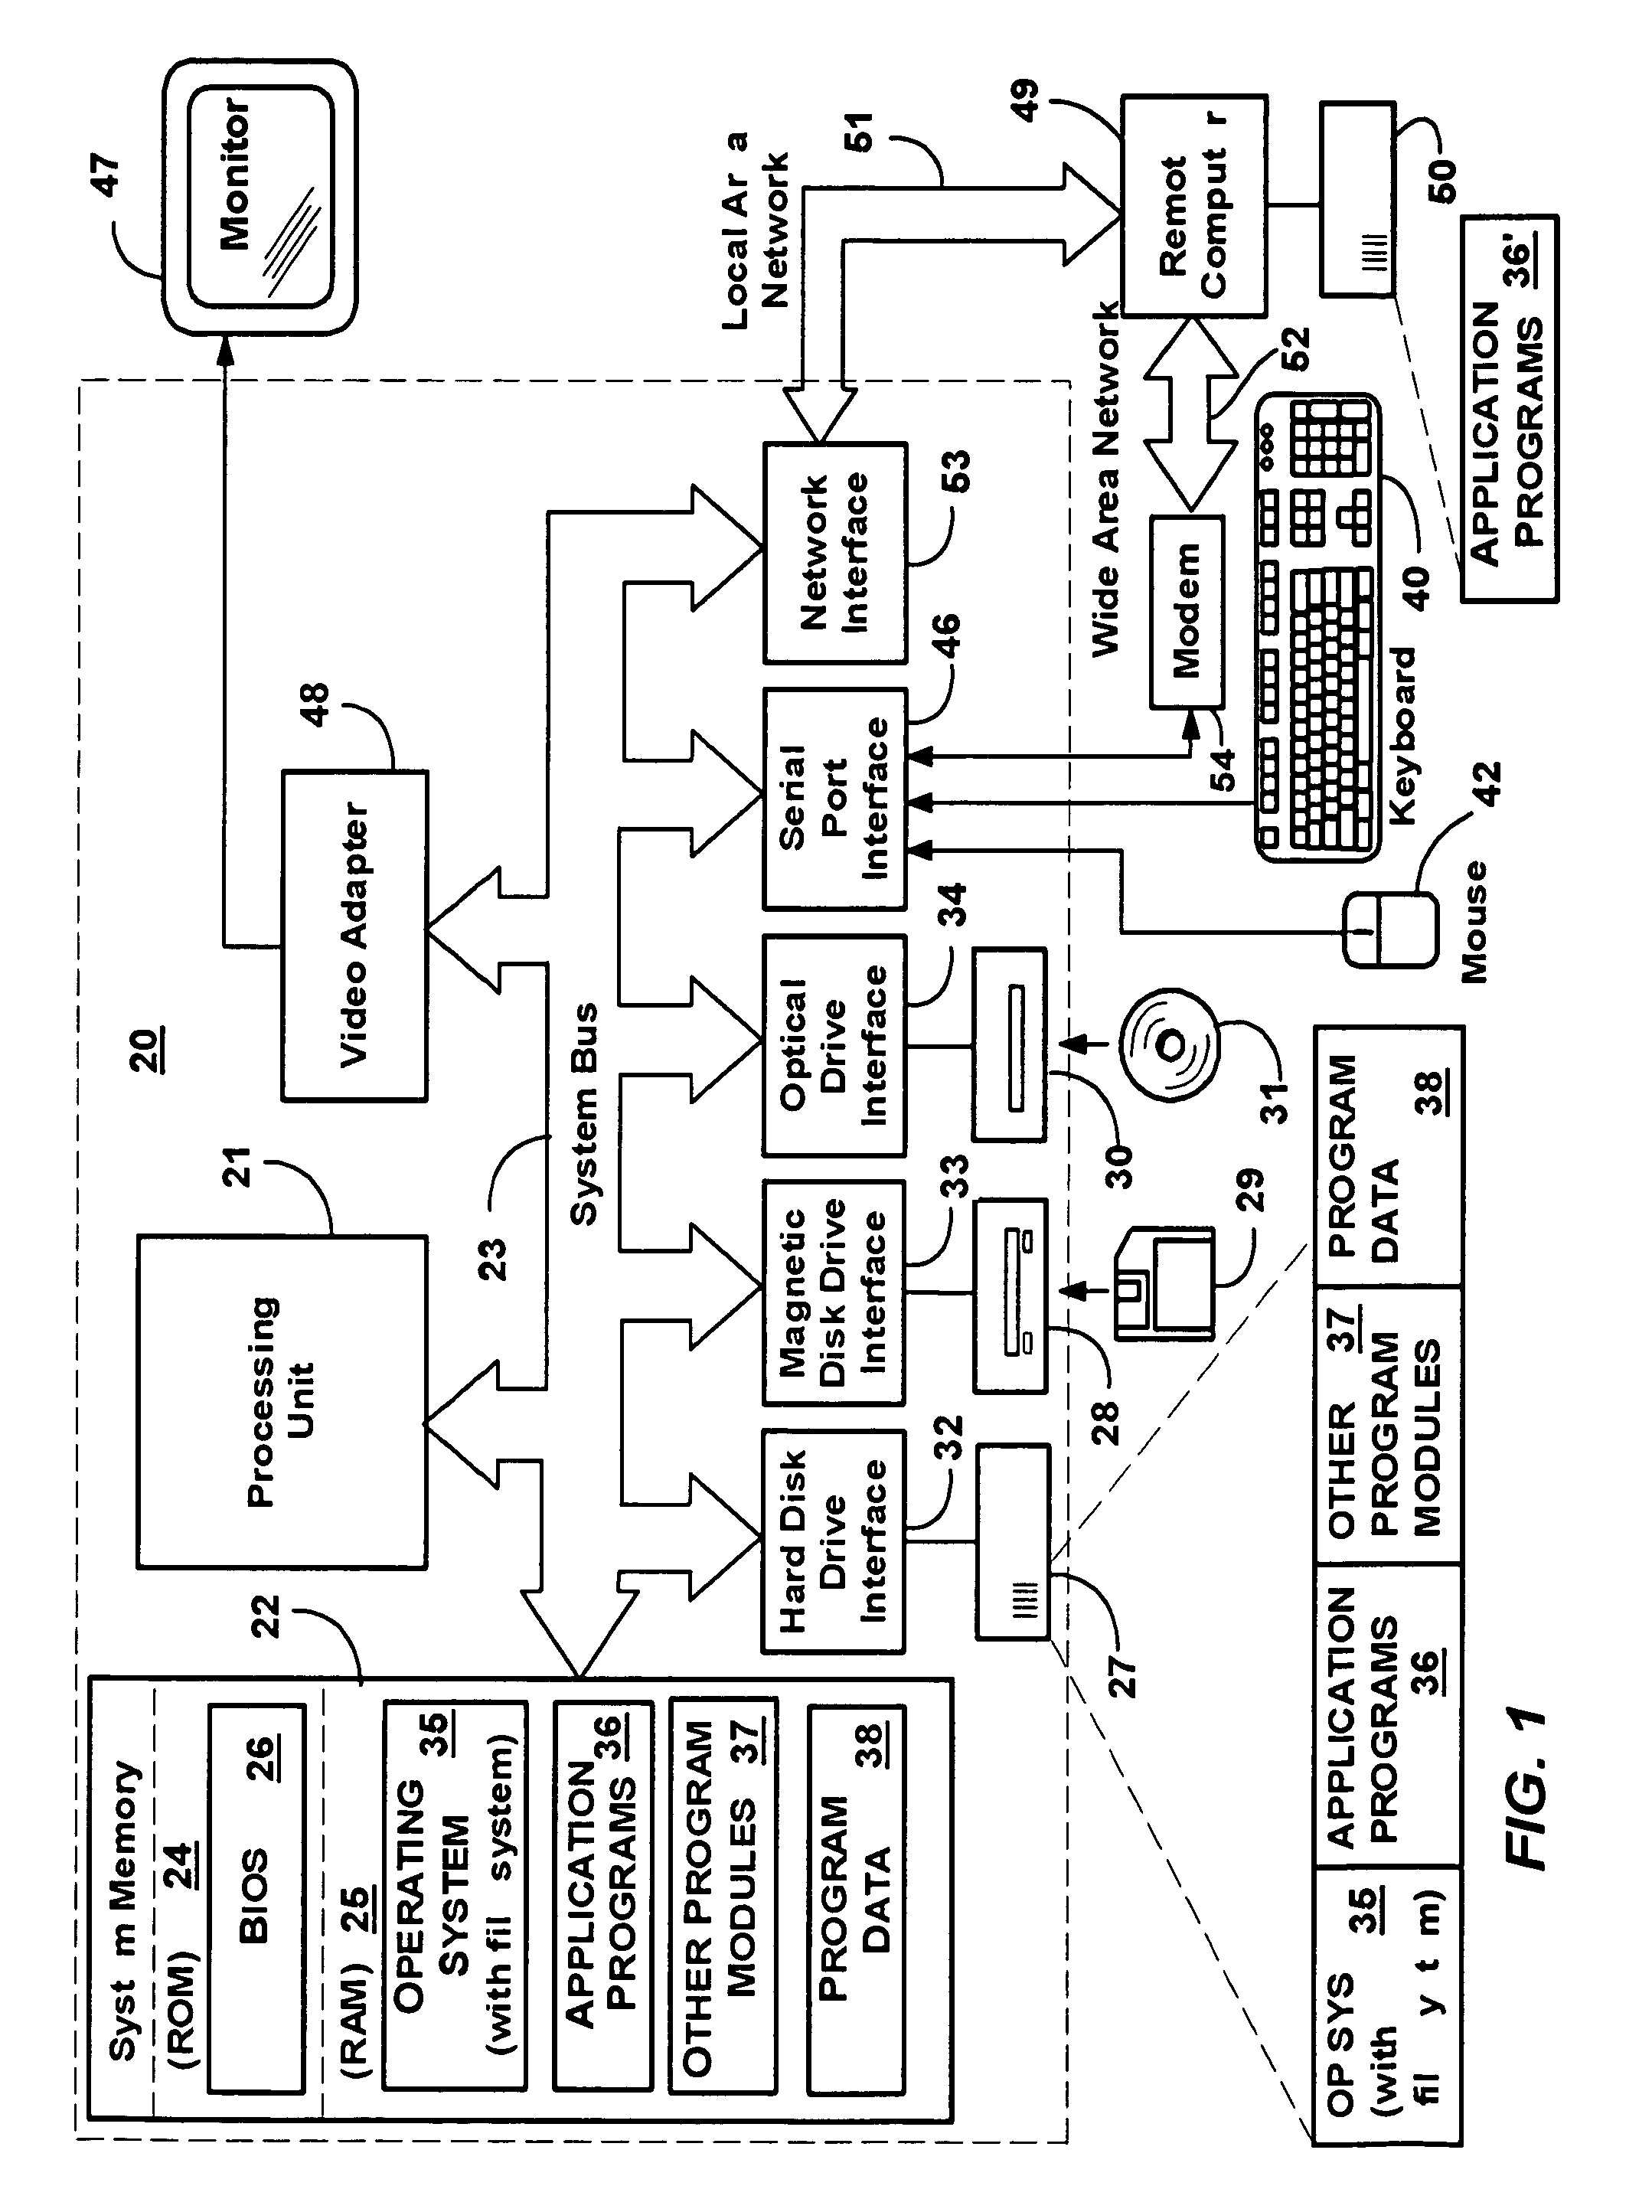 Method and system for remote client installation